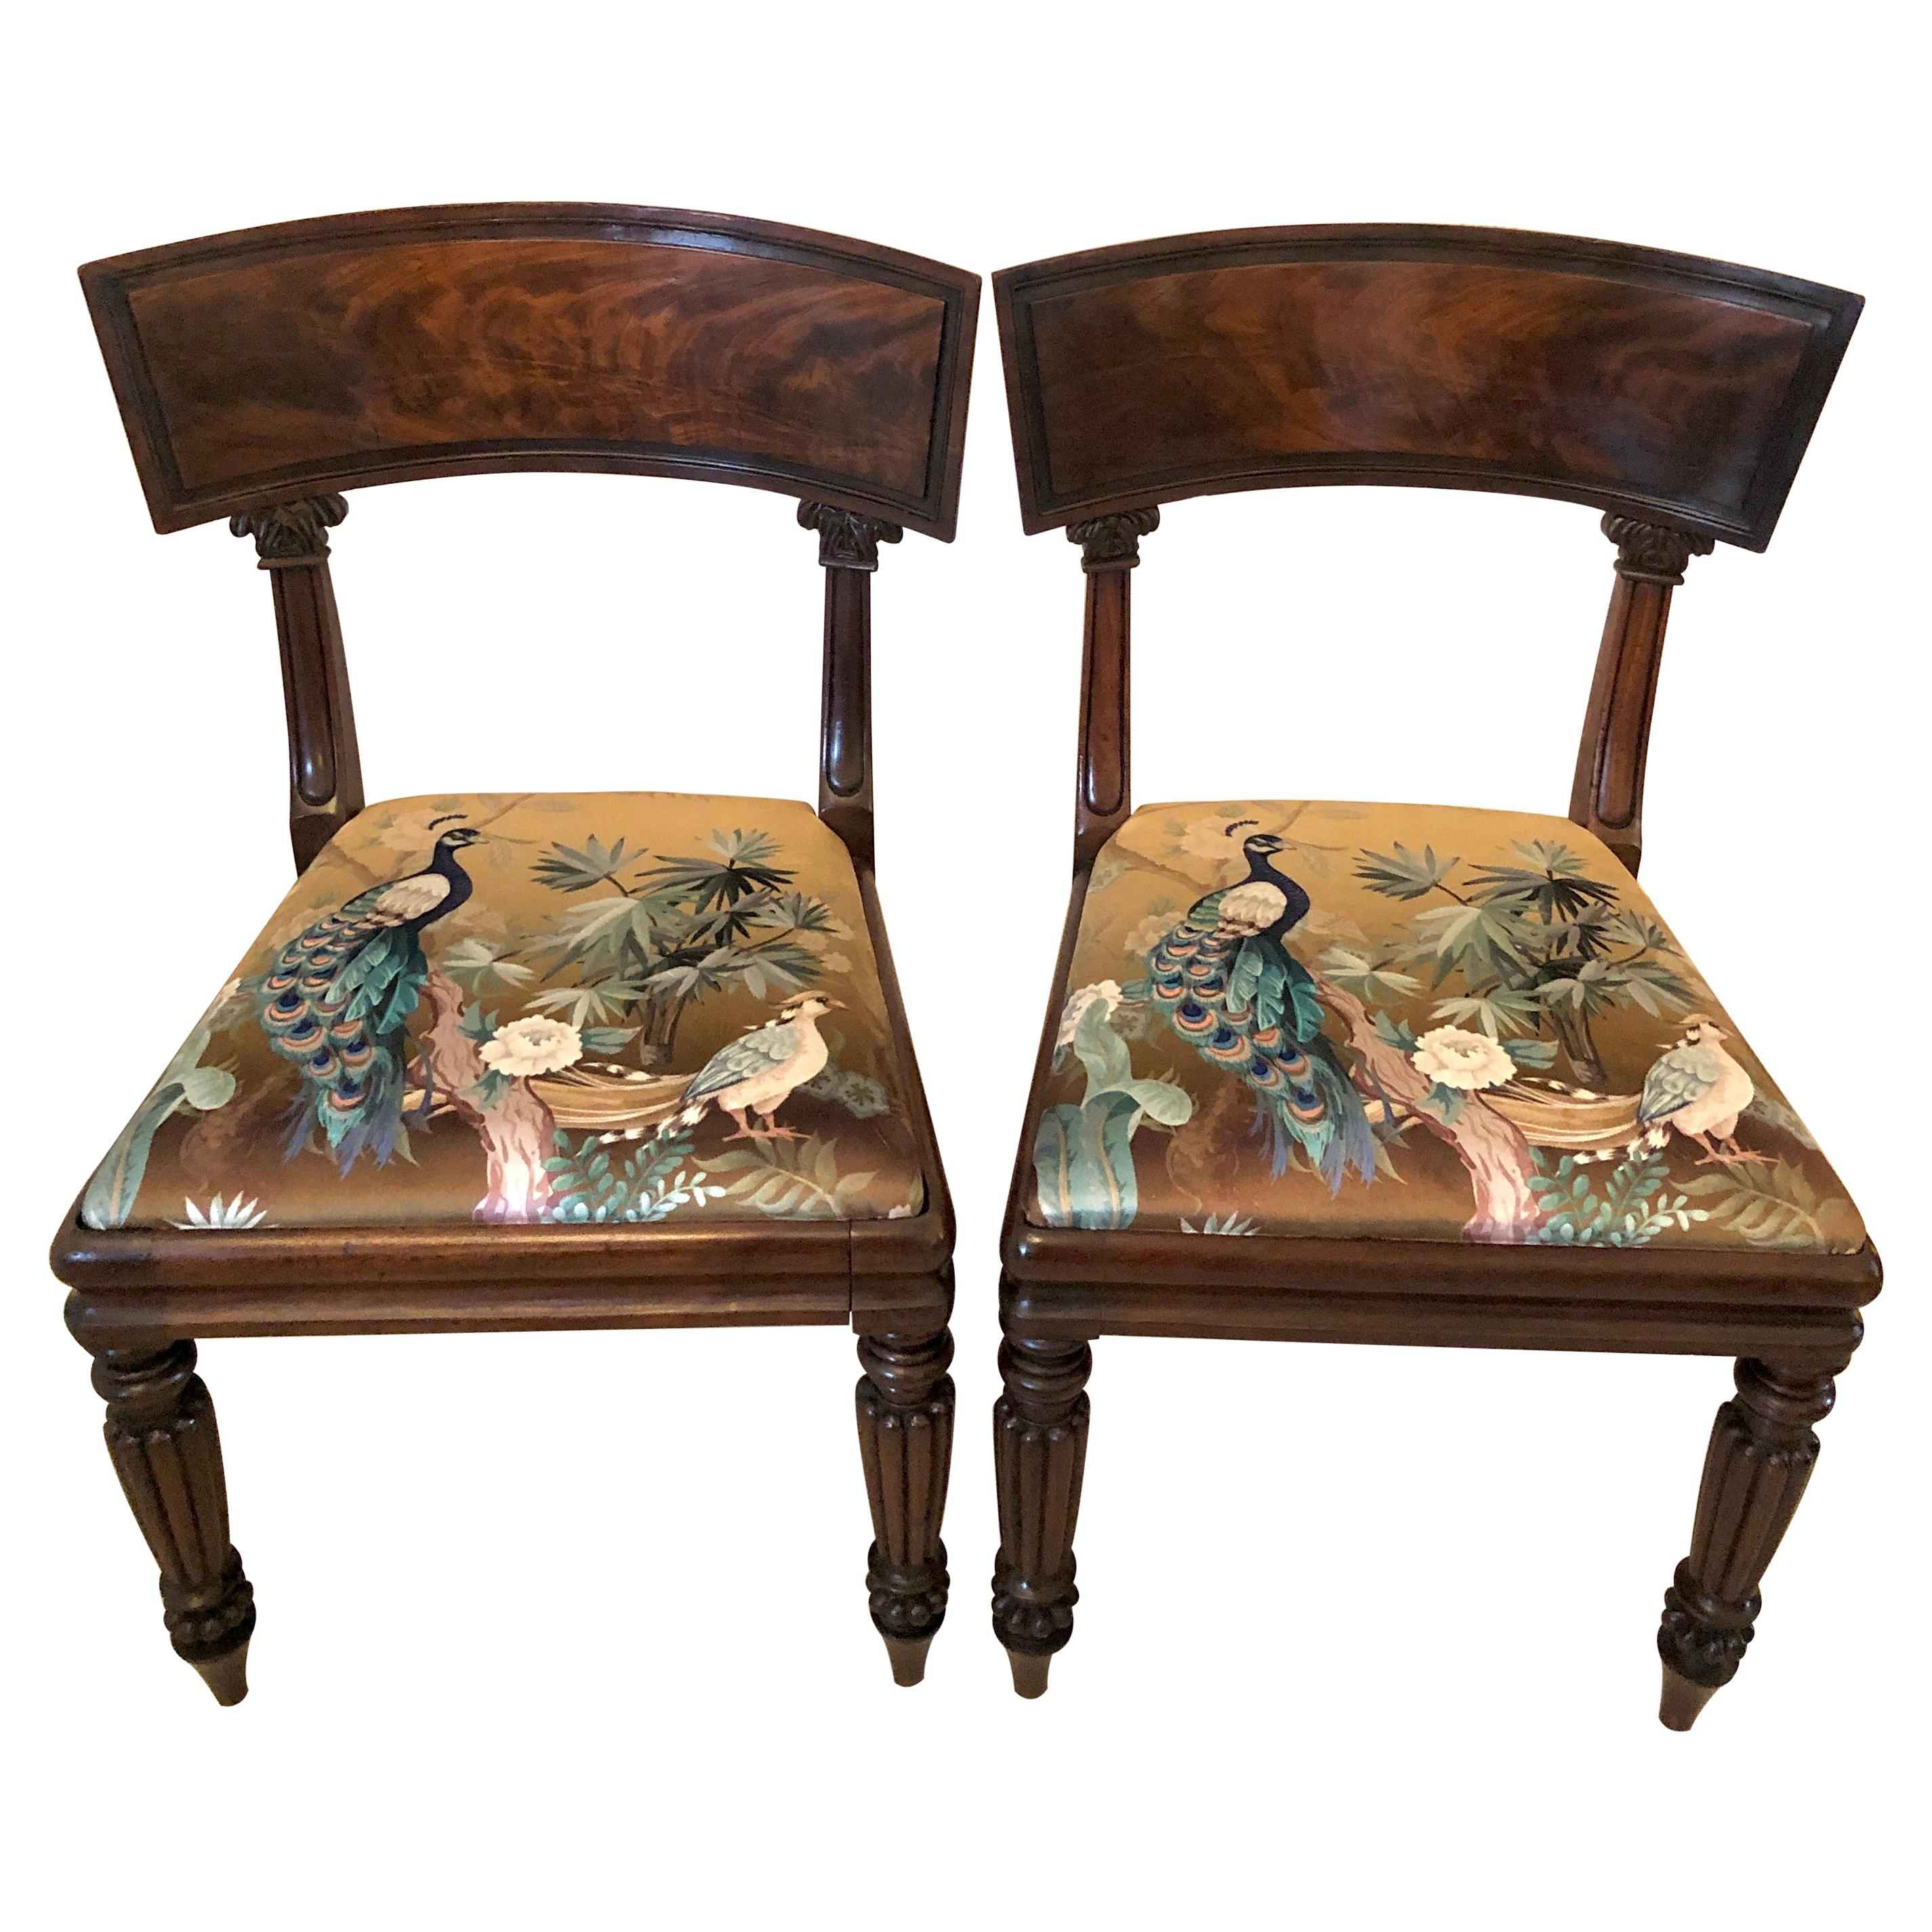 Pair of Antique Mahogany Regency Library Chairs